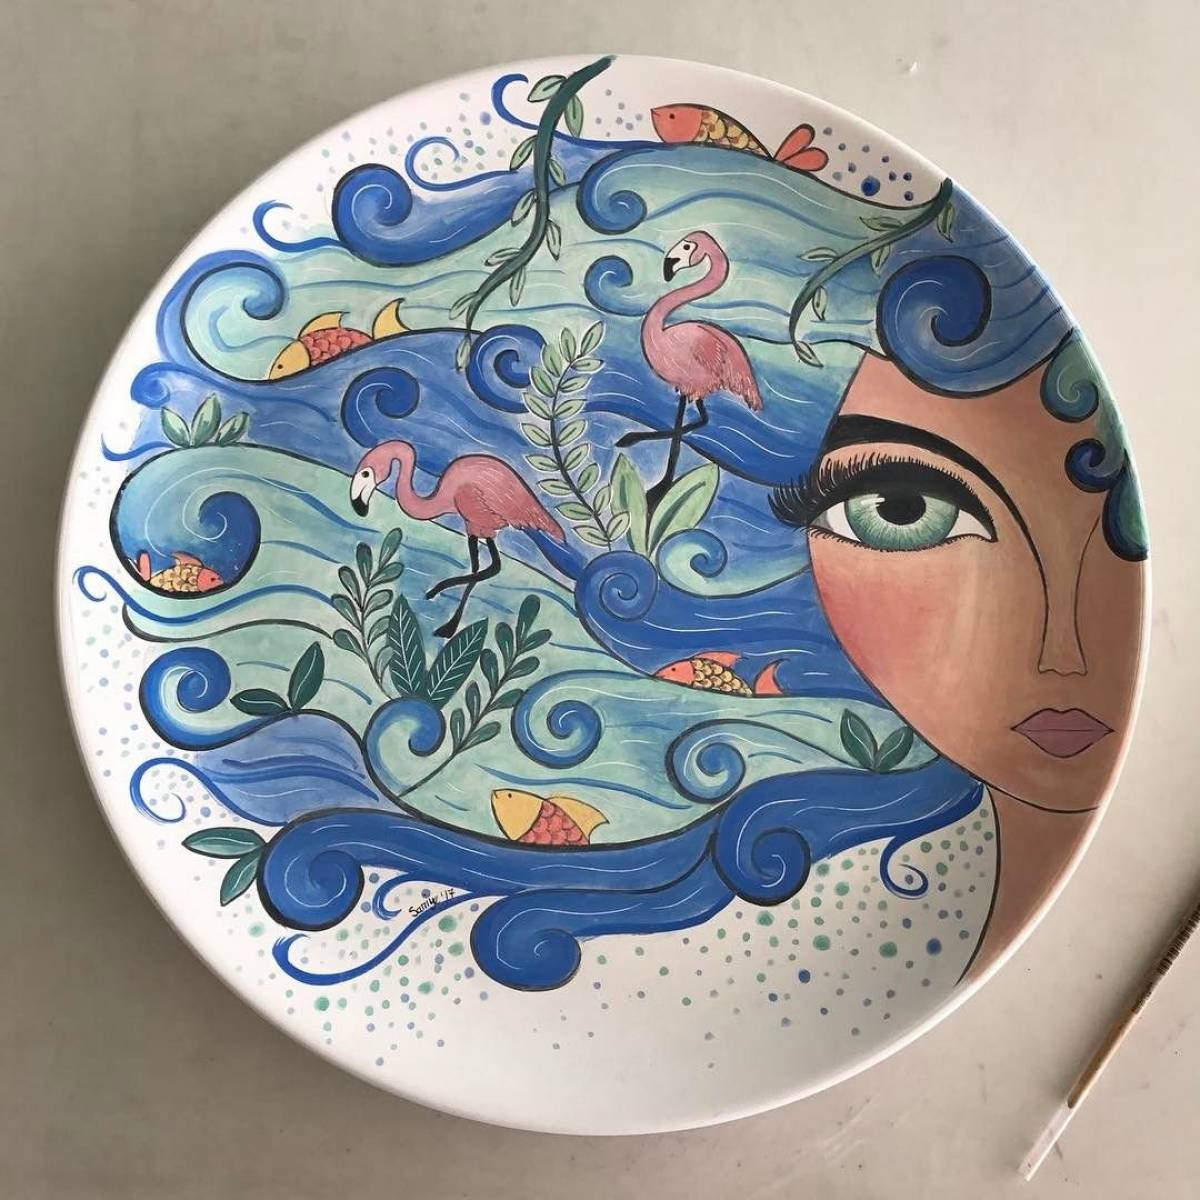 Plates with acrylics #11